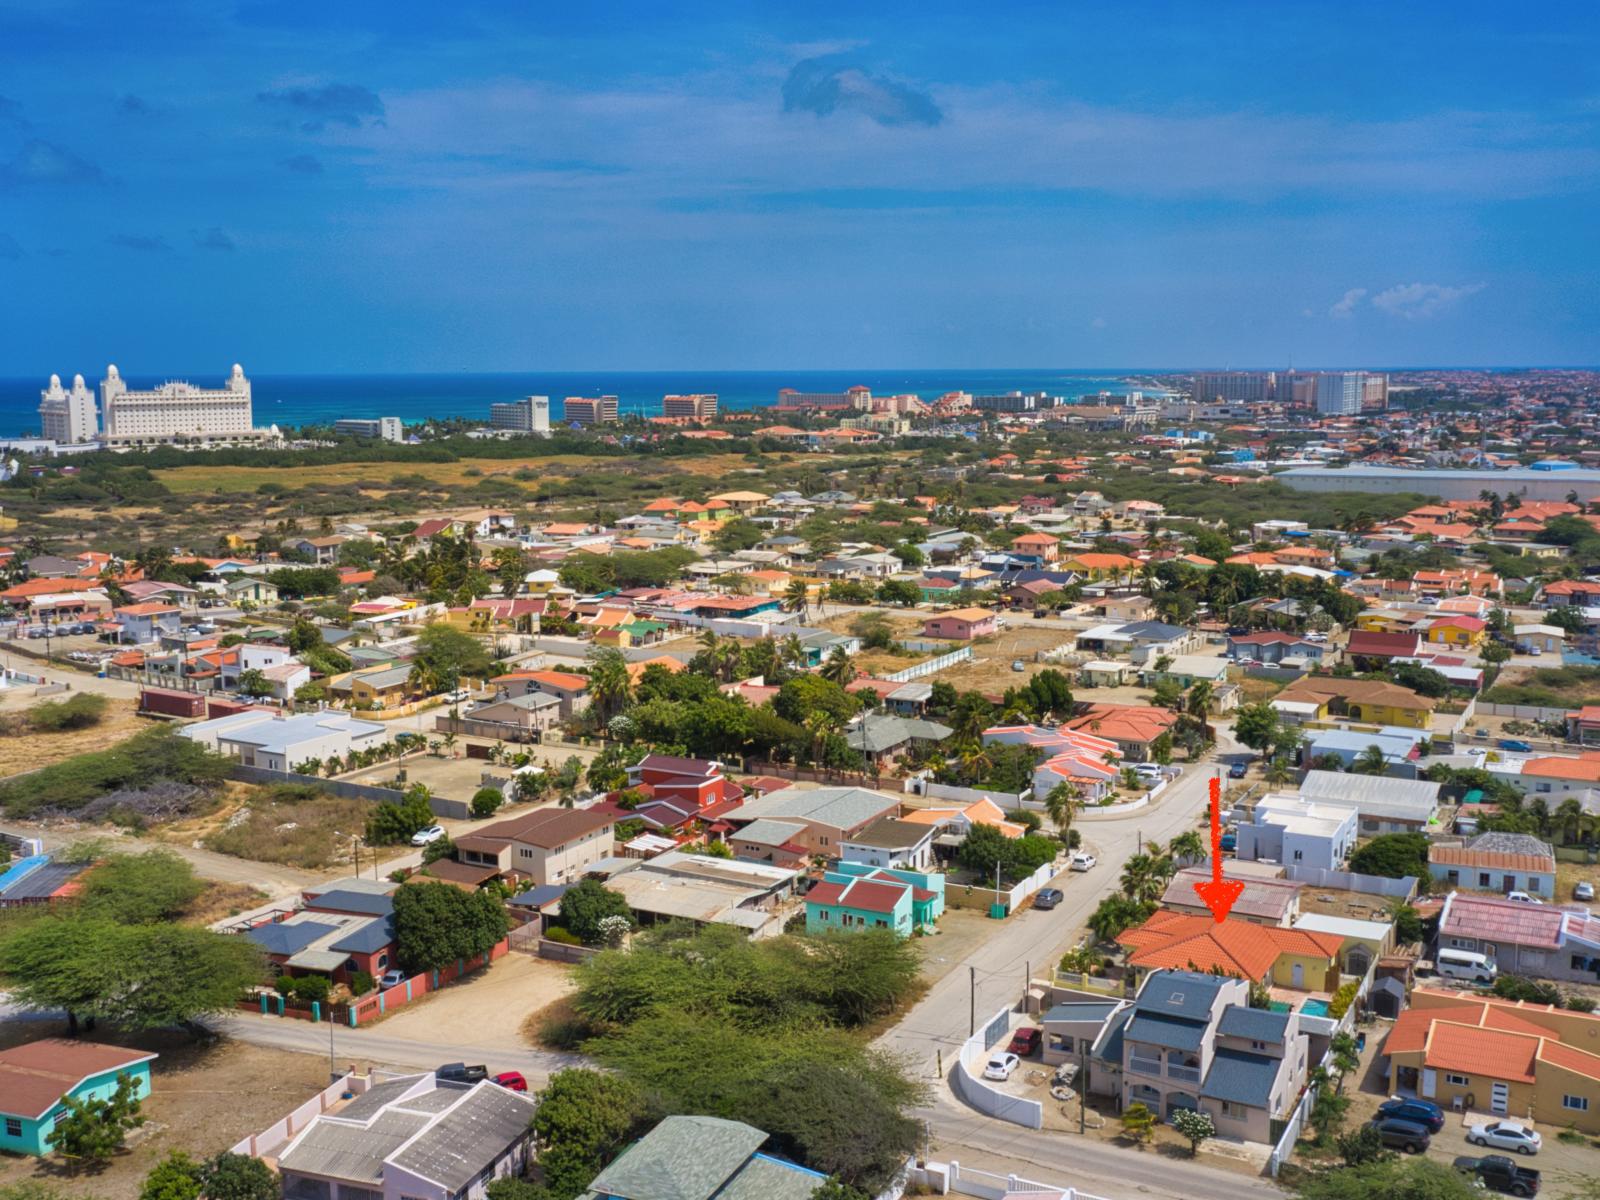 Great location close to the beach, exploring never an issue - Experience the best of both worlds with perfectly situated retreat - Get ready to explore the wonders of Aruba, steps away from the charming home